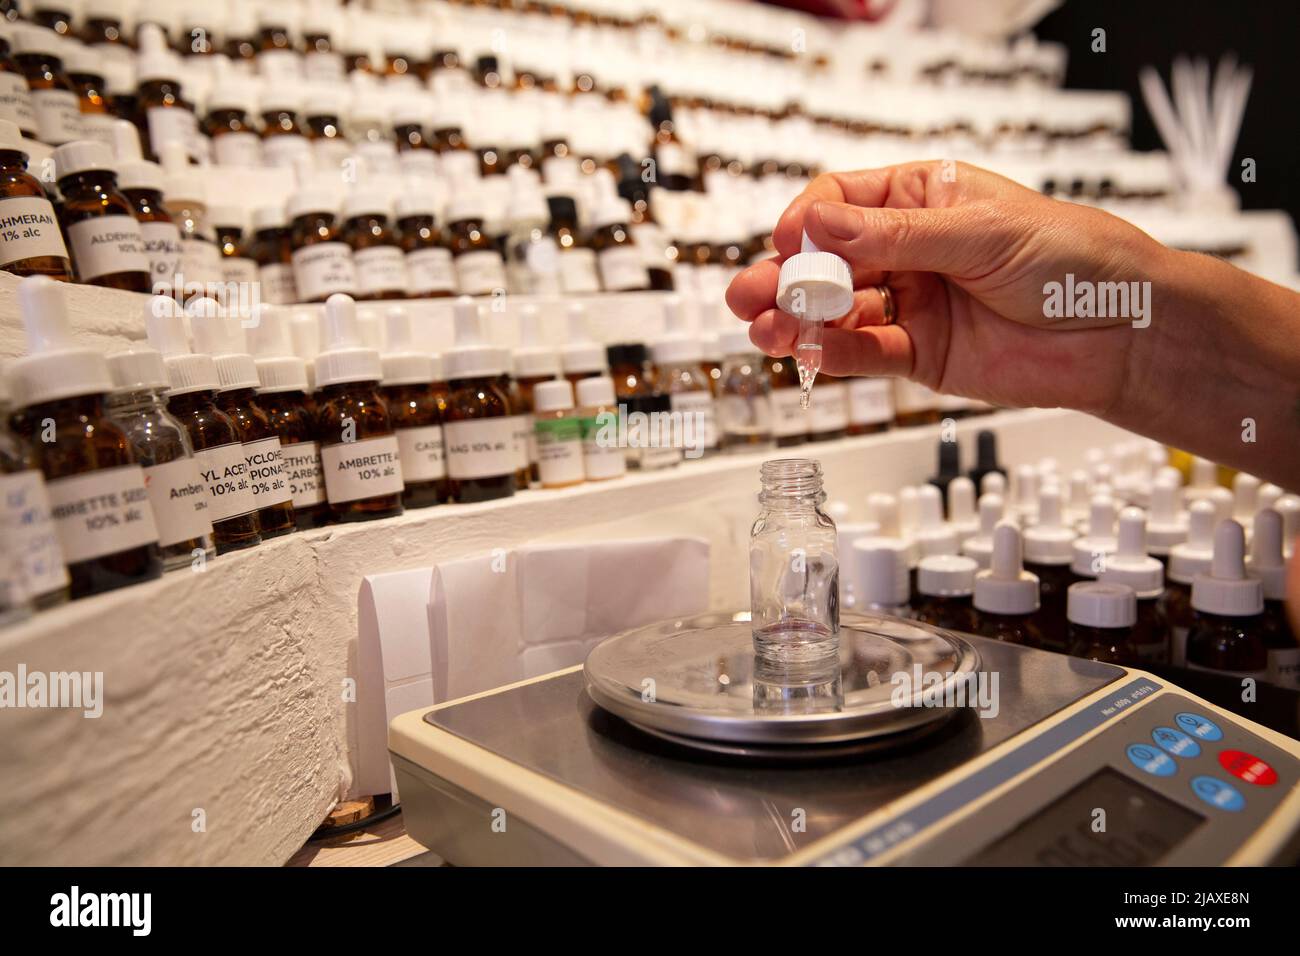 Jessica Buchanan, a perfume maker from Canada, creates a perfume at her perfumer’s organ displaying hundreds of vials of raw scent materials in her shop “1000 flowers” in Grasse, France on September 9, 2021. Jessica came to Provence in 2007 to attend the Grasse Institute of Perfumery. Today she has her own boutique in Grasse and is what's known in the business as a nose, or a nez in French. 'We do learn how to smell,' Buchanan says. 'That part of the brain really develops. It's like a muscle. It becomes more developed in a perfumer than in a regular person who's not paying attention to scents Stock Photo